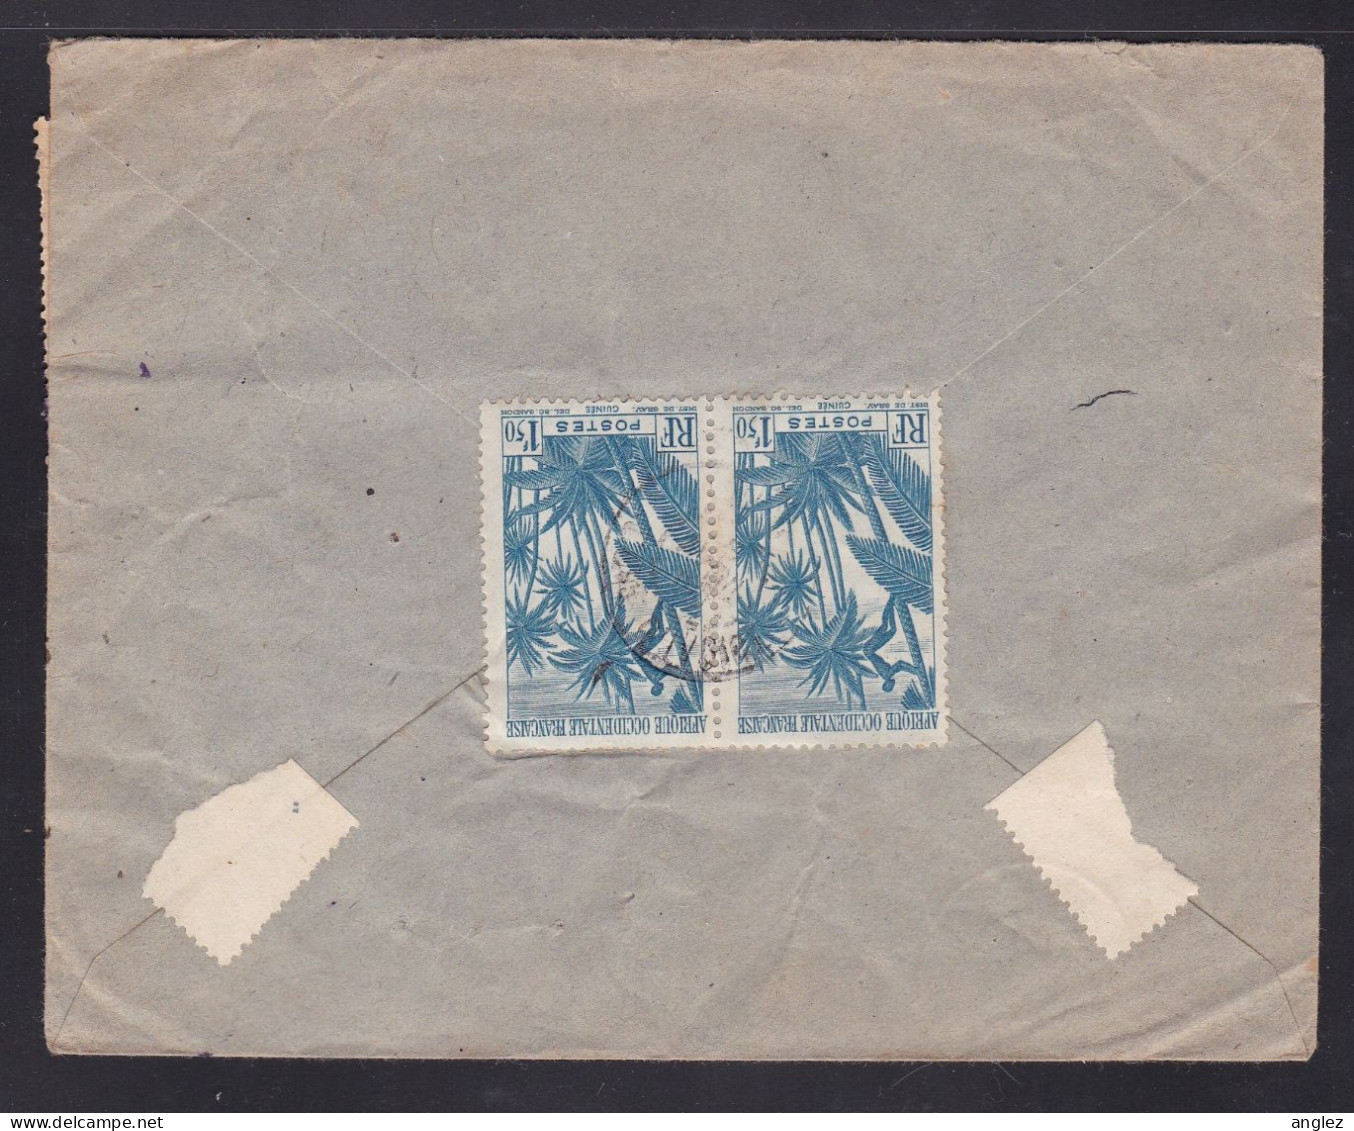 France / AOF / Cote D'Ivoire / Ivory Coast - 1950 Airmail Cover Divo To Chicago USA - Covers & Documents